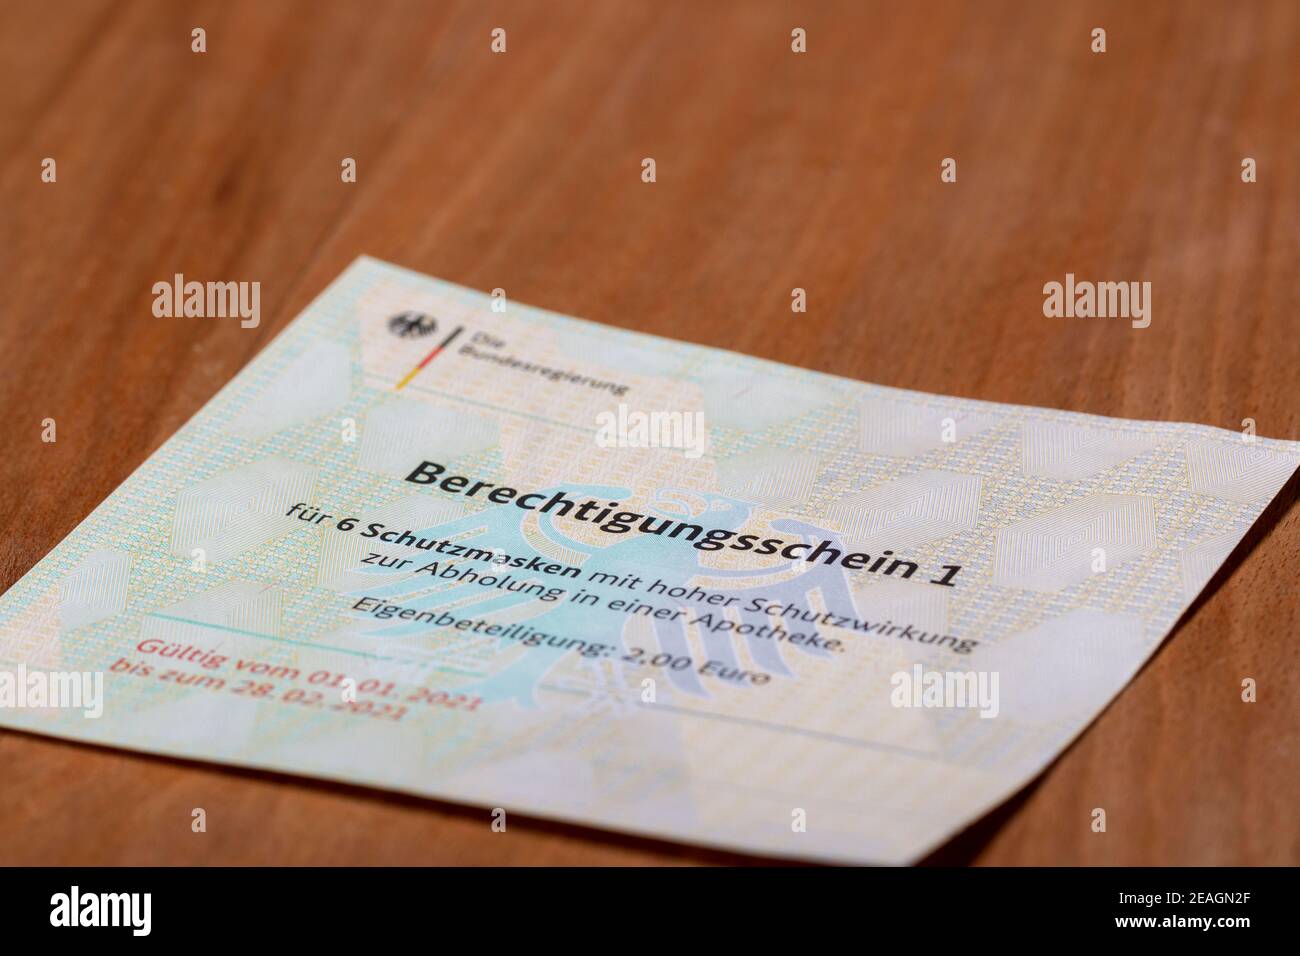 Stuttgart,Germany- February 09.2021:Closeup of german government entitling certificate for ffp2 protection masks purchase warrant Stock Photo